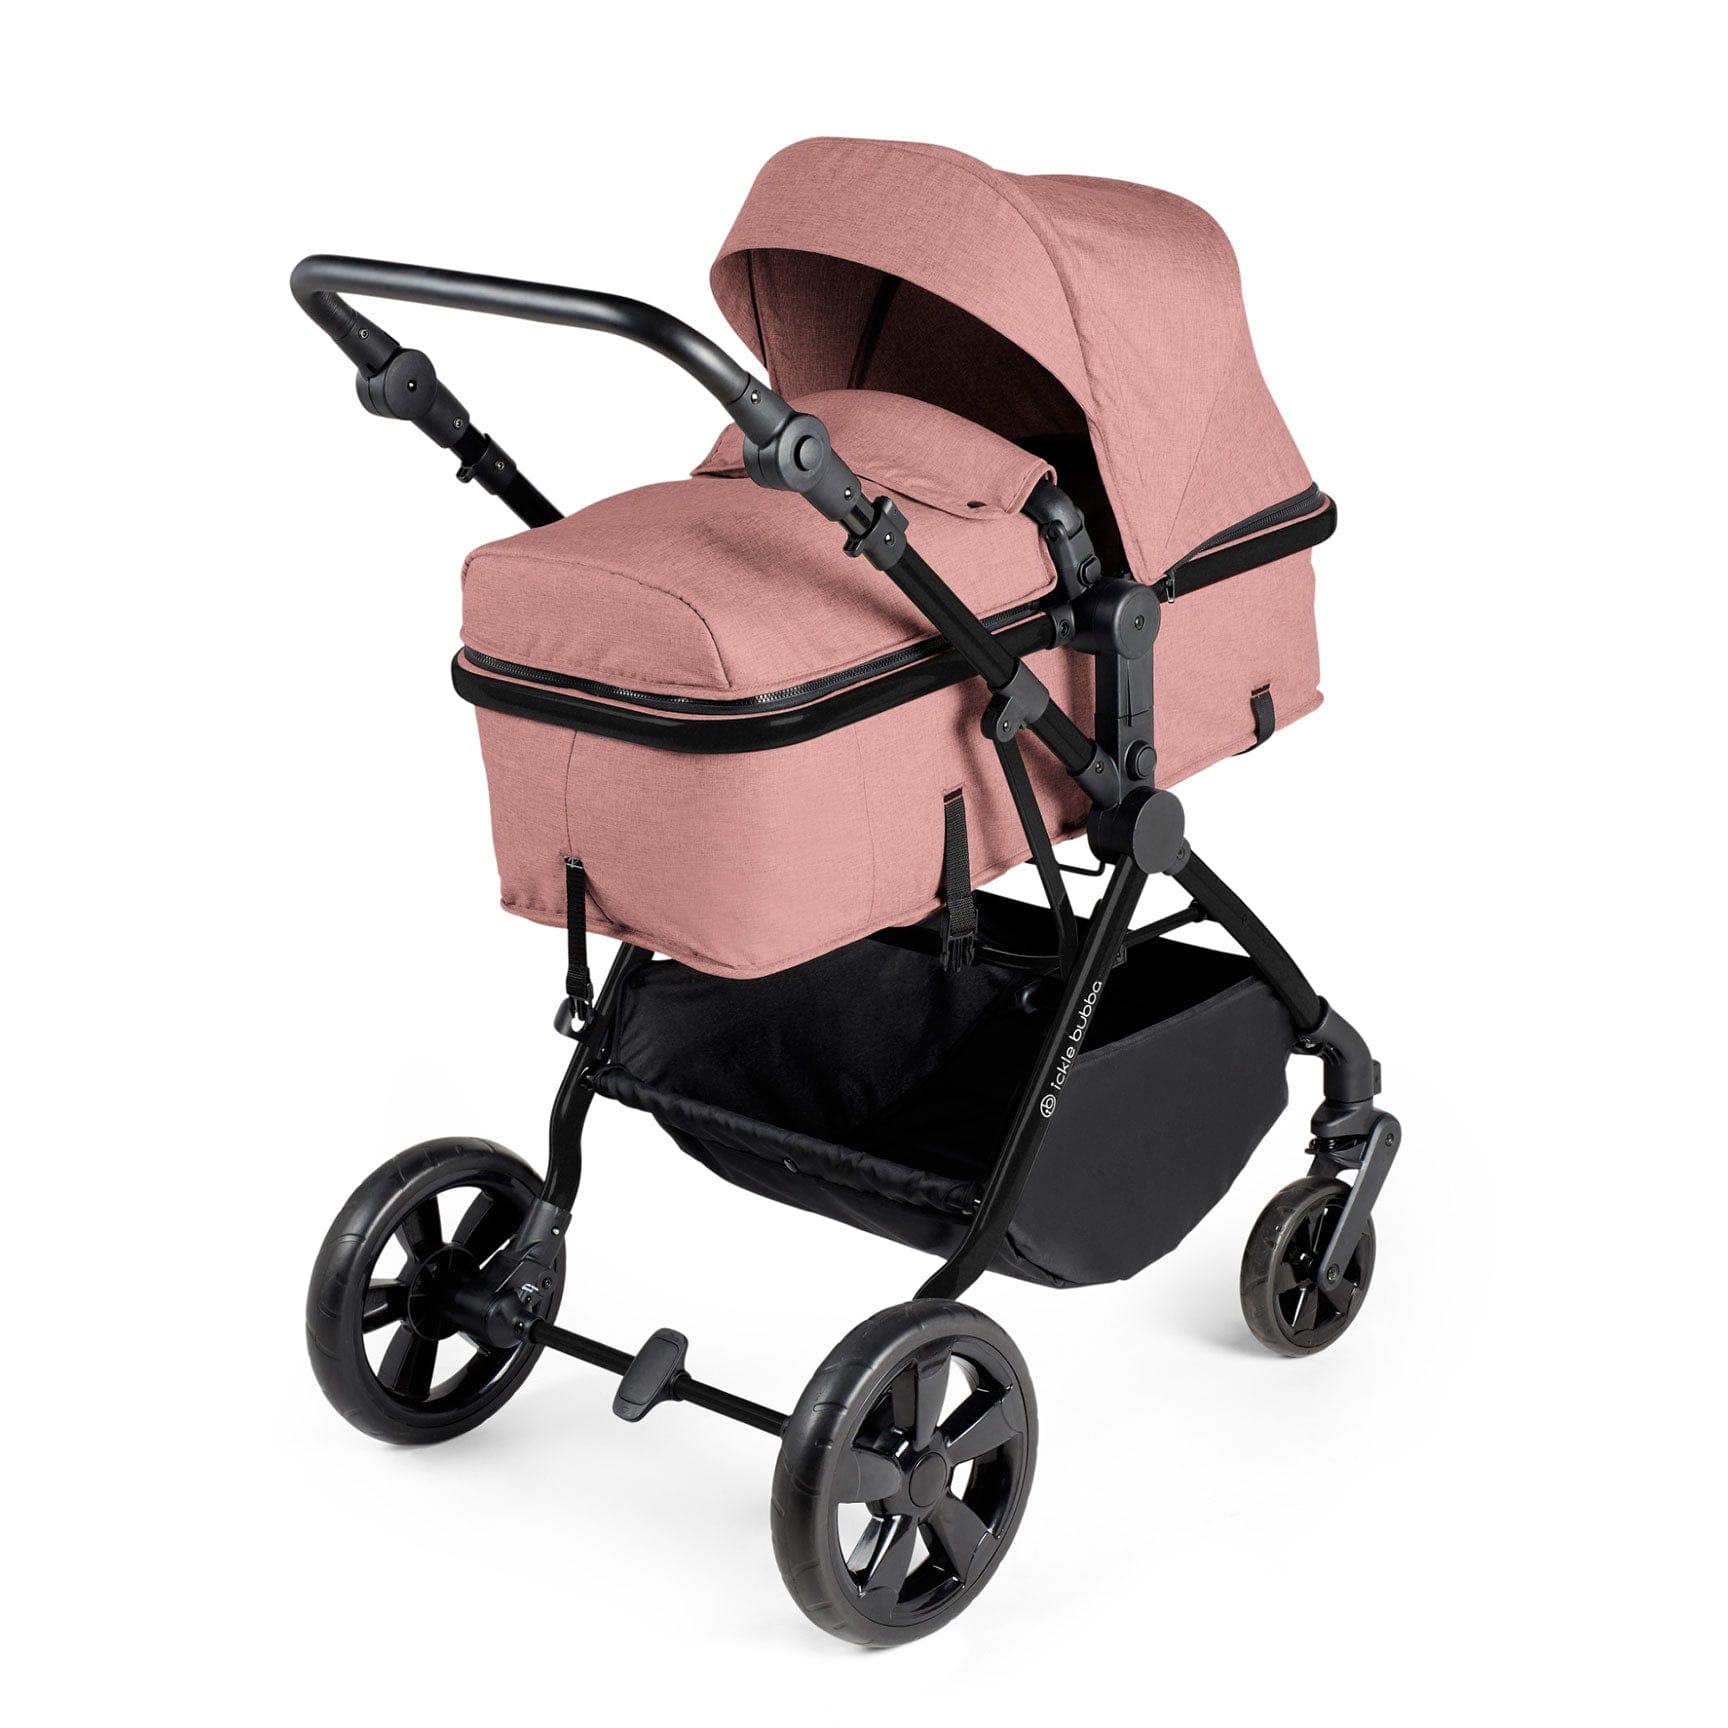 Ickle Bubba baby prams Ickle Bubba Comet 2-in-1 Plus Carrycot & Pushchair - Dusty Pink 10-008-001-134